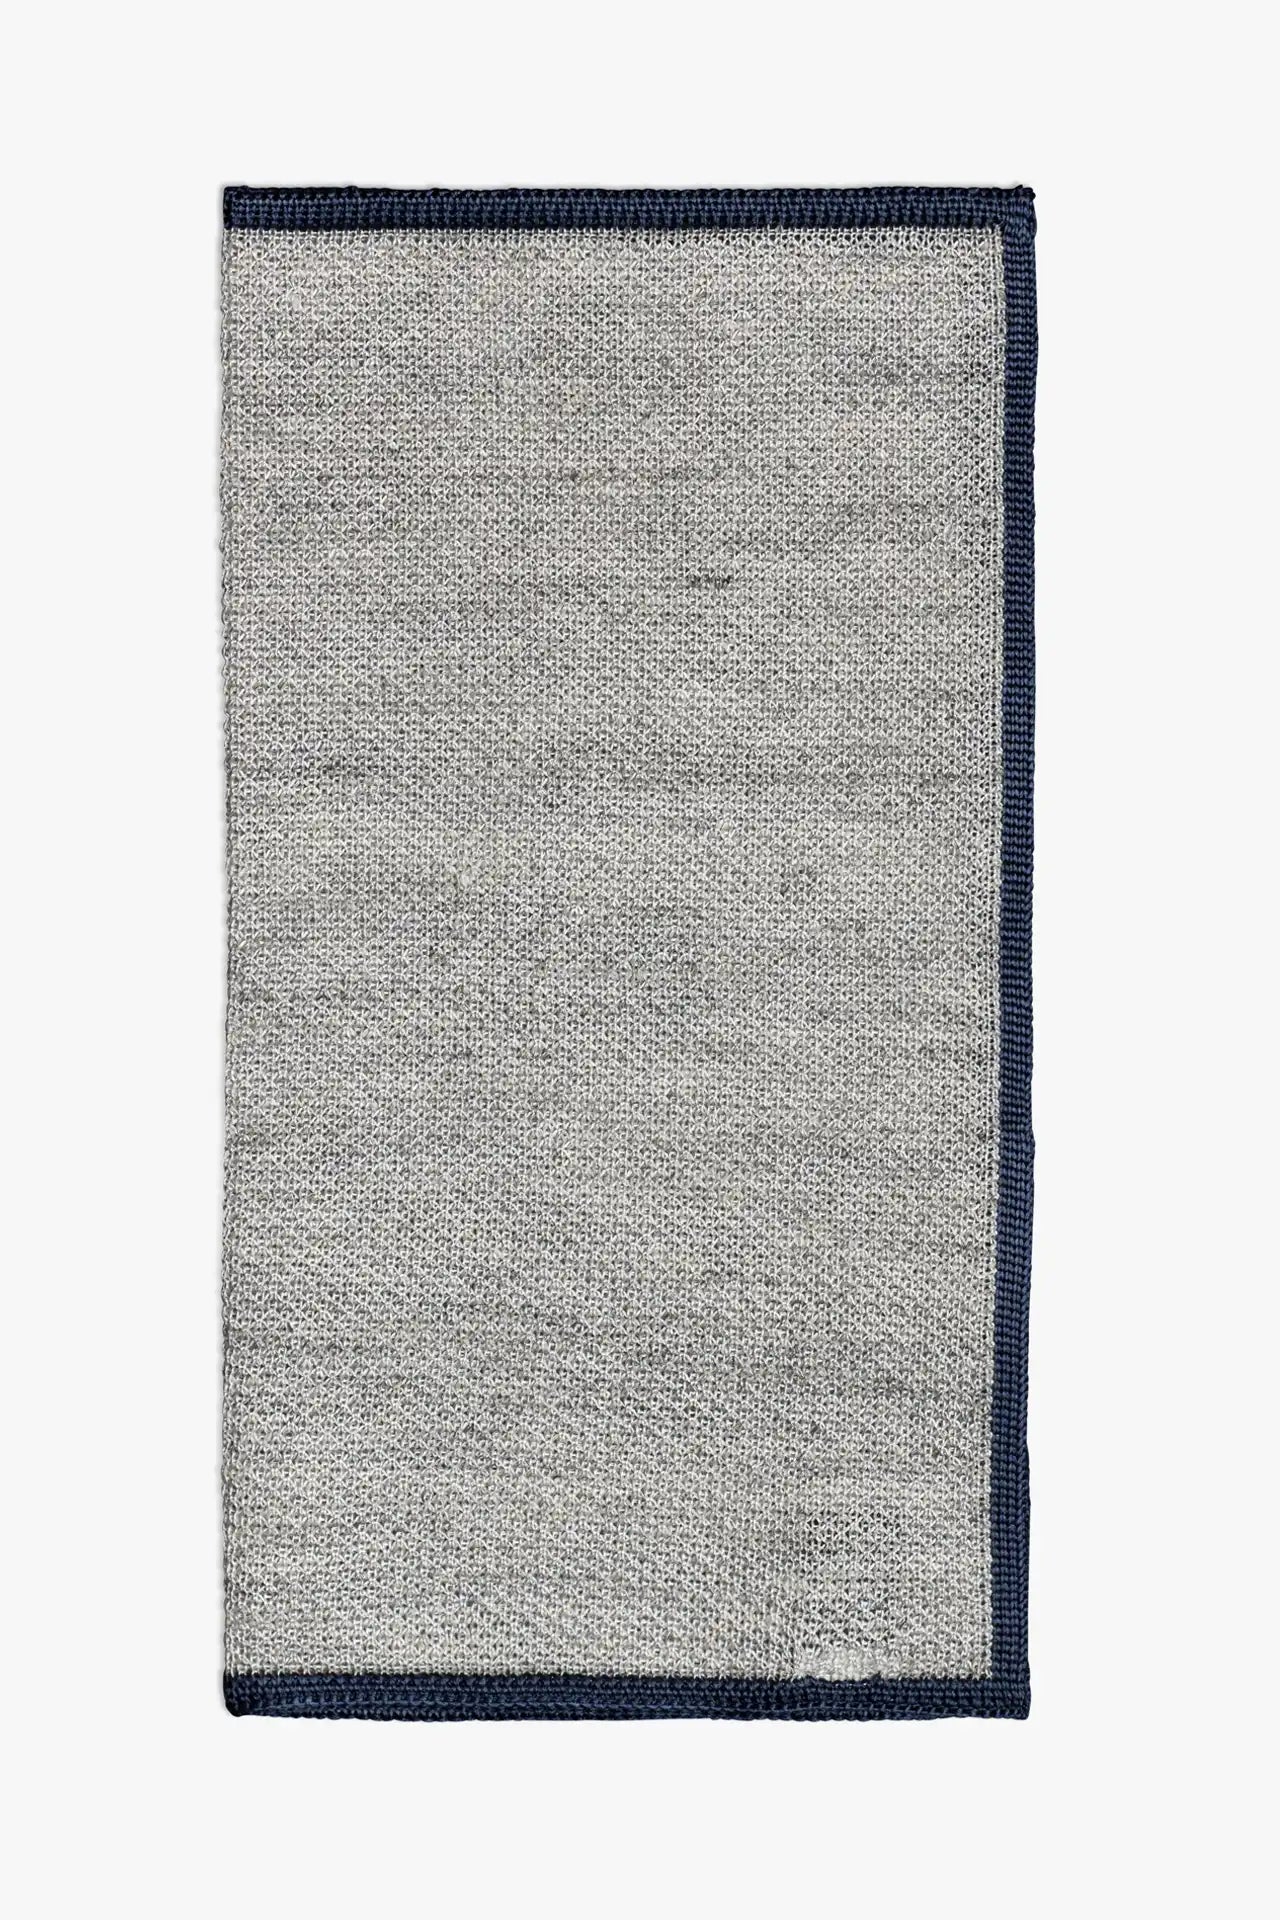 Gray knitted pocket square with navy blue boarder. Made of silk in Italy.